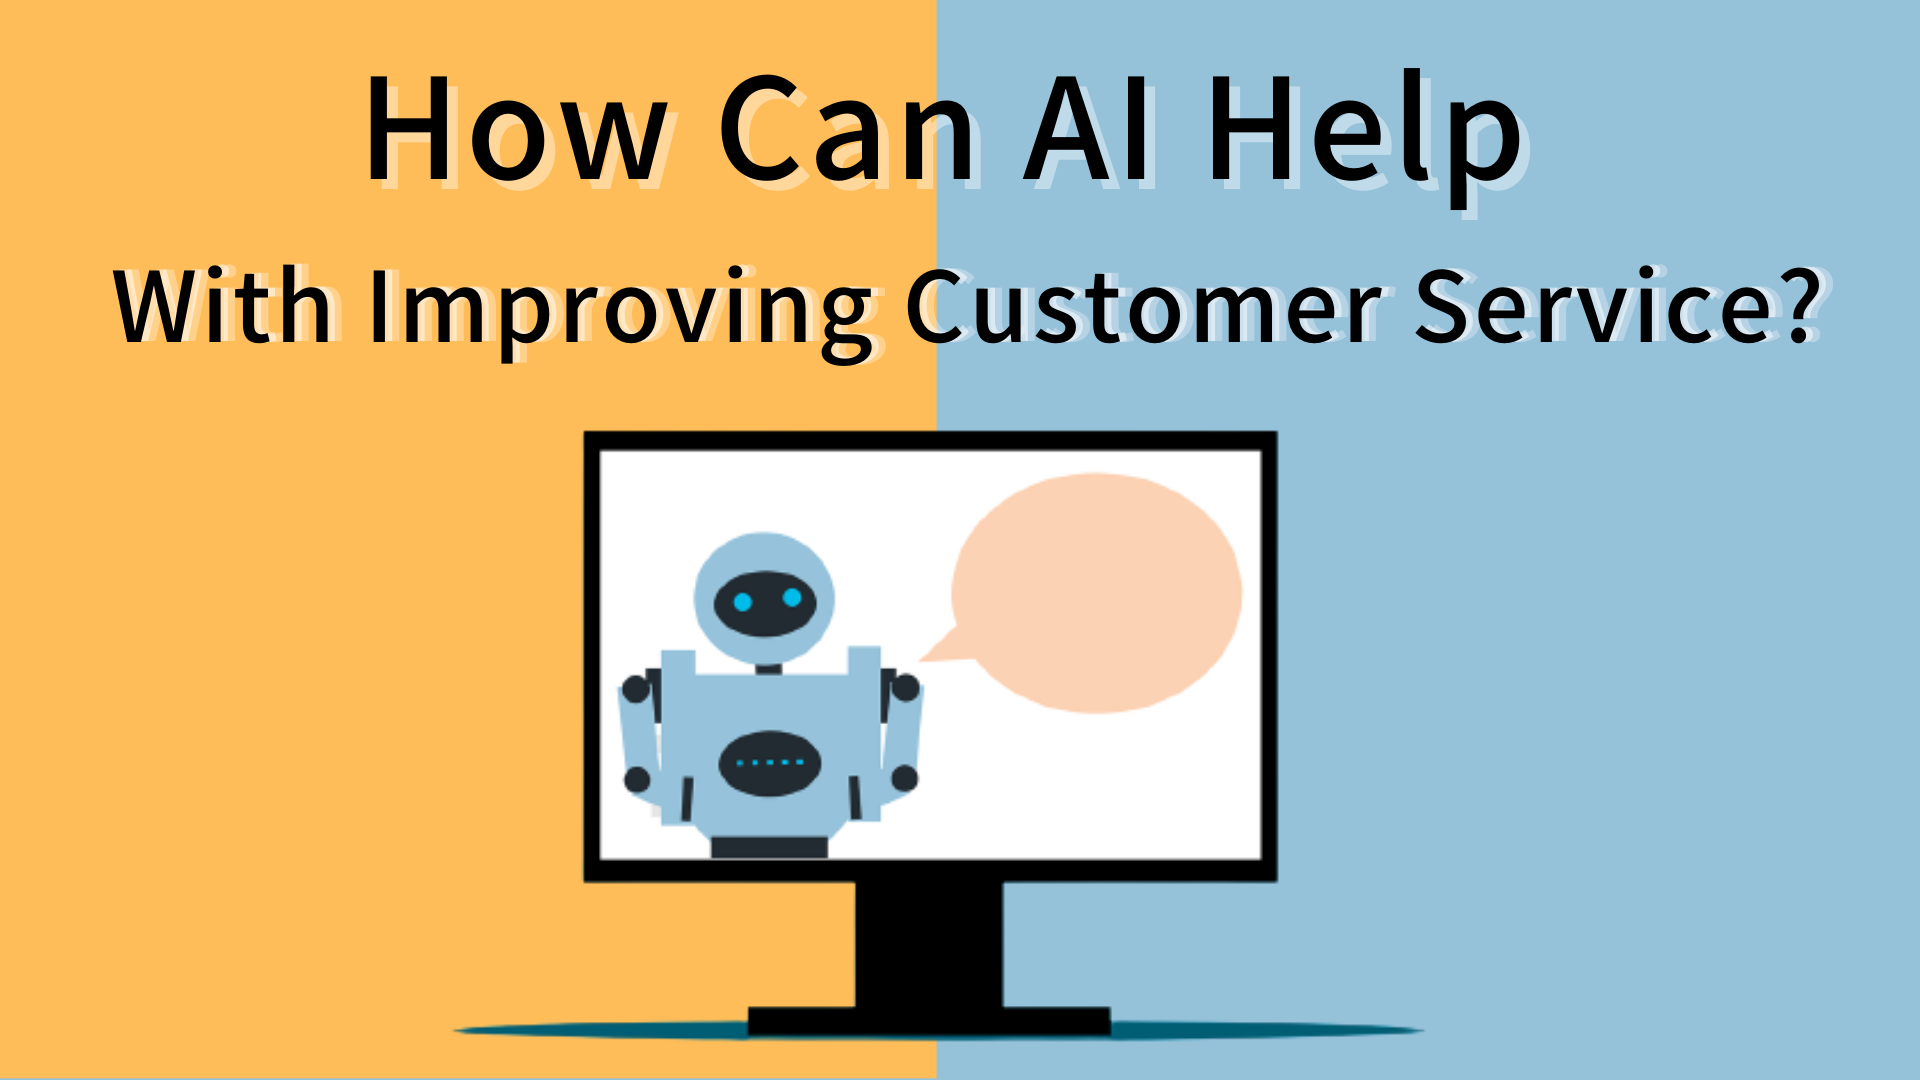 How Can AI Help With Improving Customer Service?